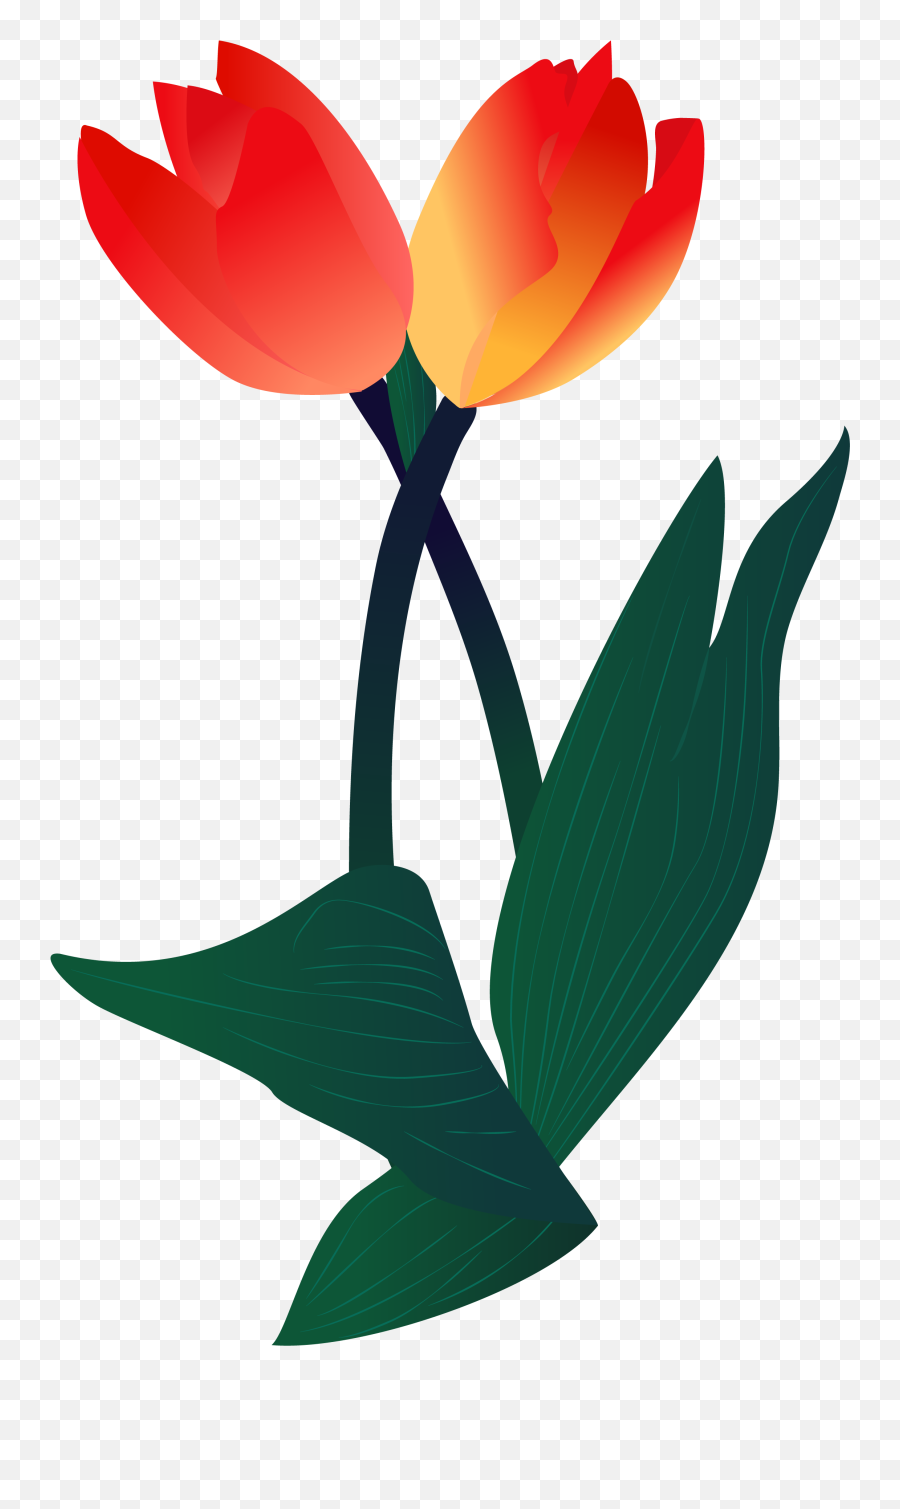 Plant Illustration Flower Png And - Vector Tulip Flower Illustration Png Emoji,Tulip Emoji